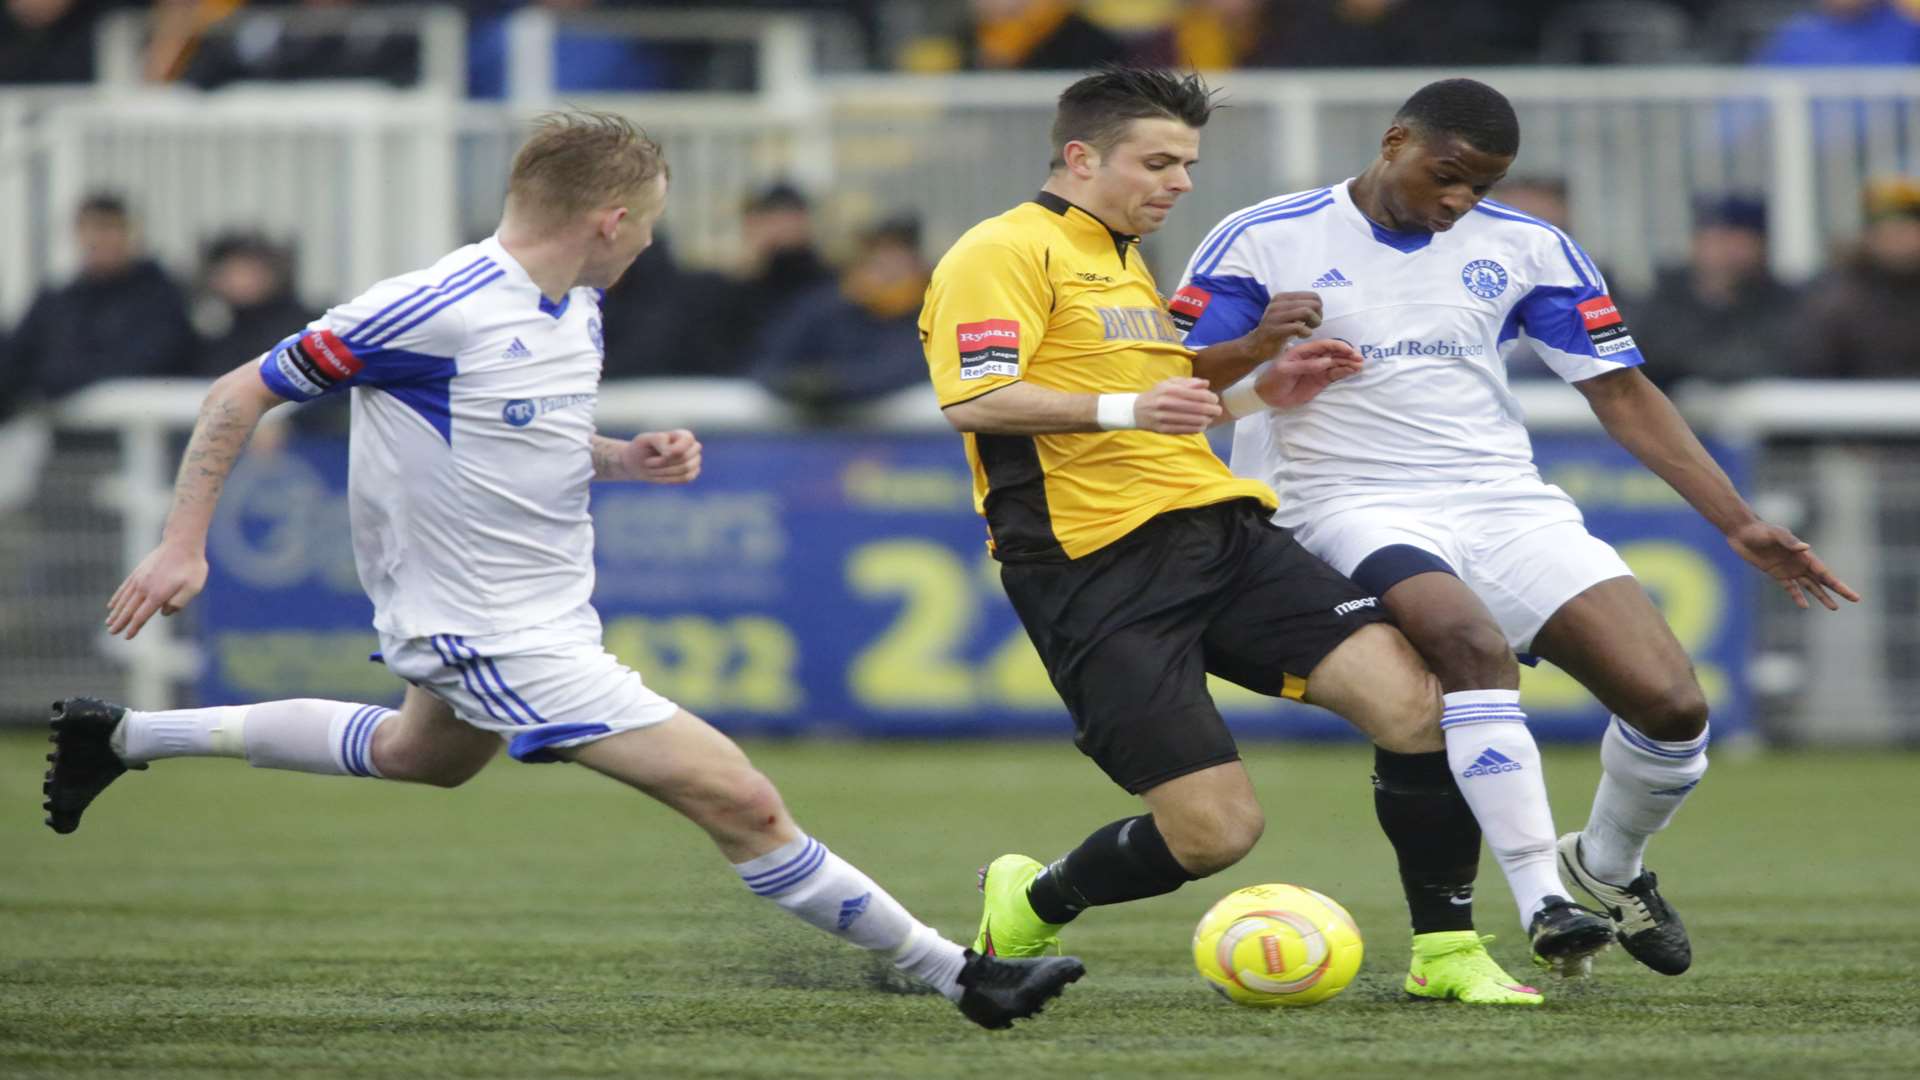 Ben Greenhalgh in action for Maidstone against Billericay Picture: Martin Apps